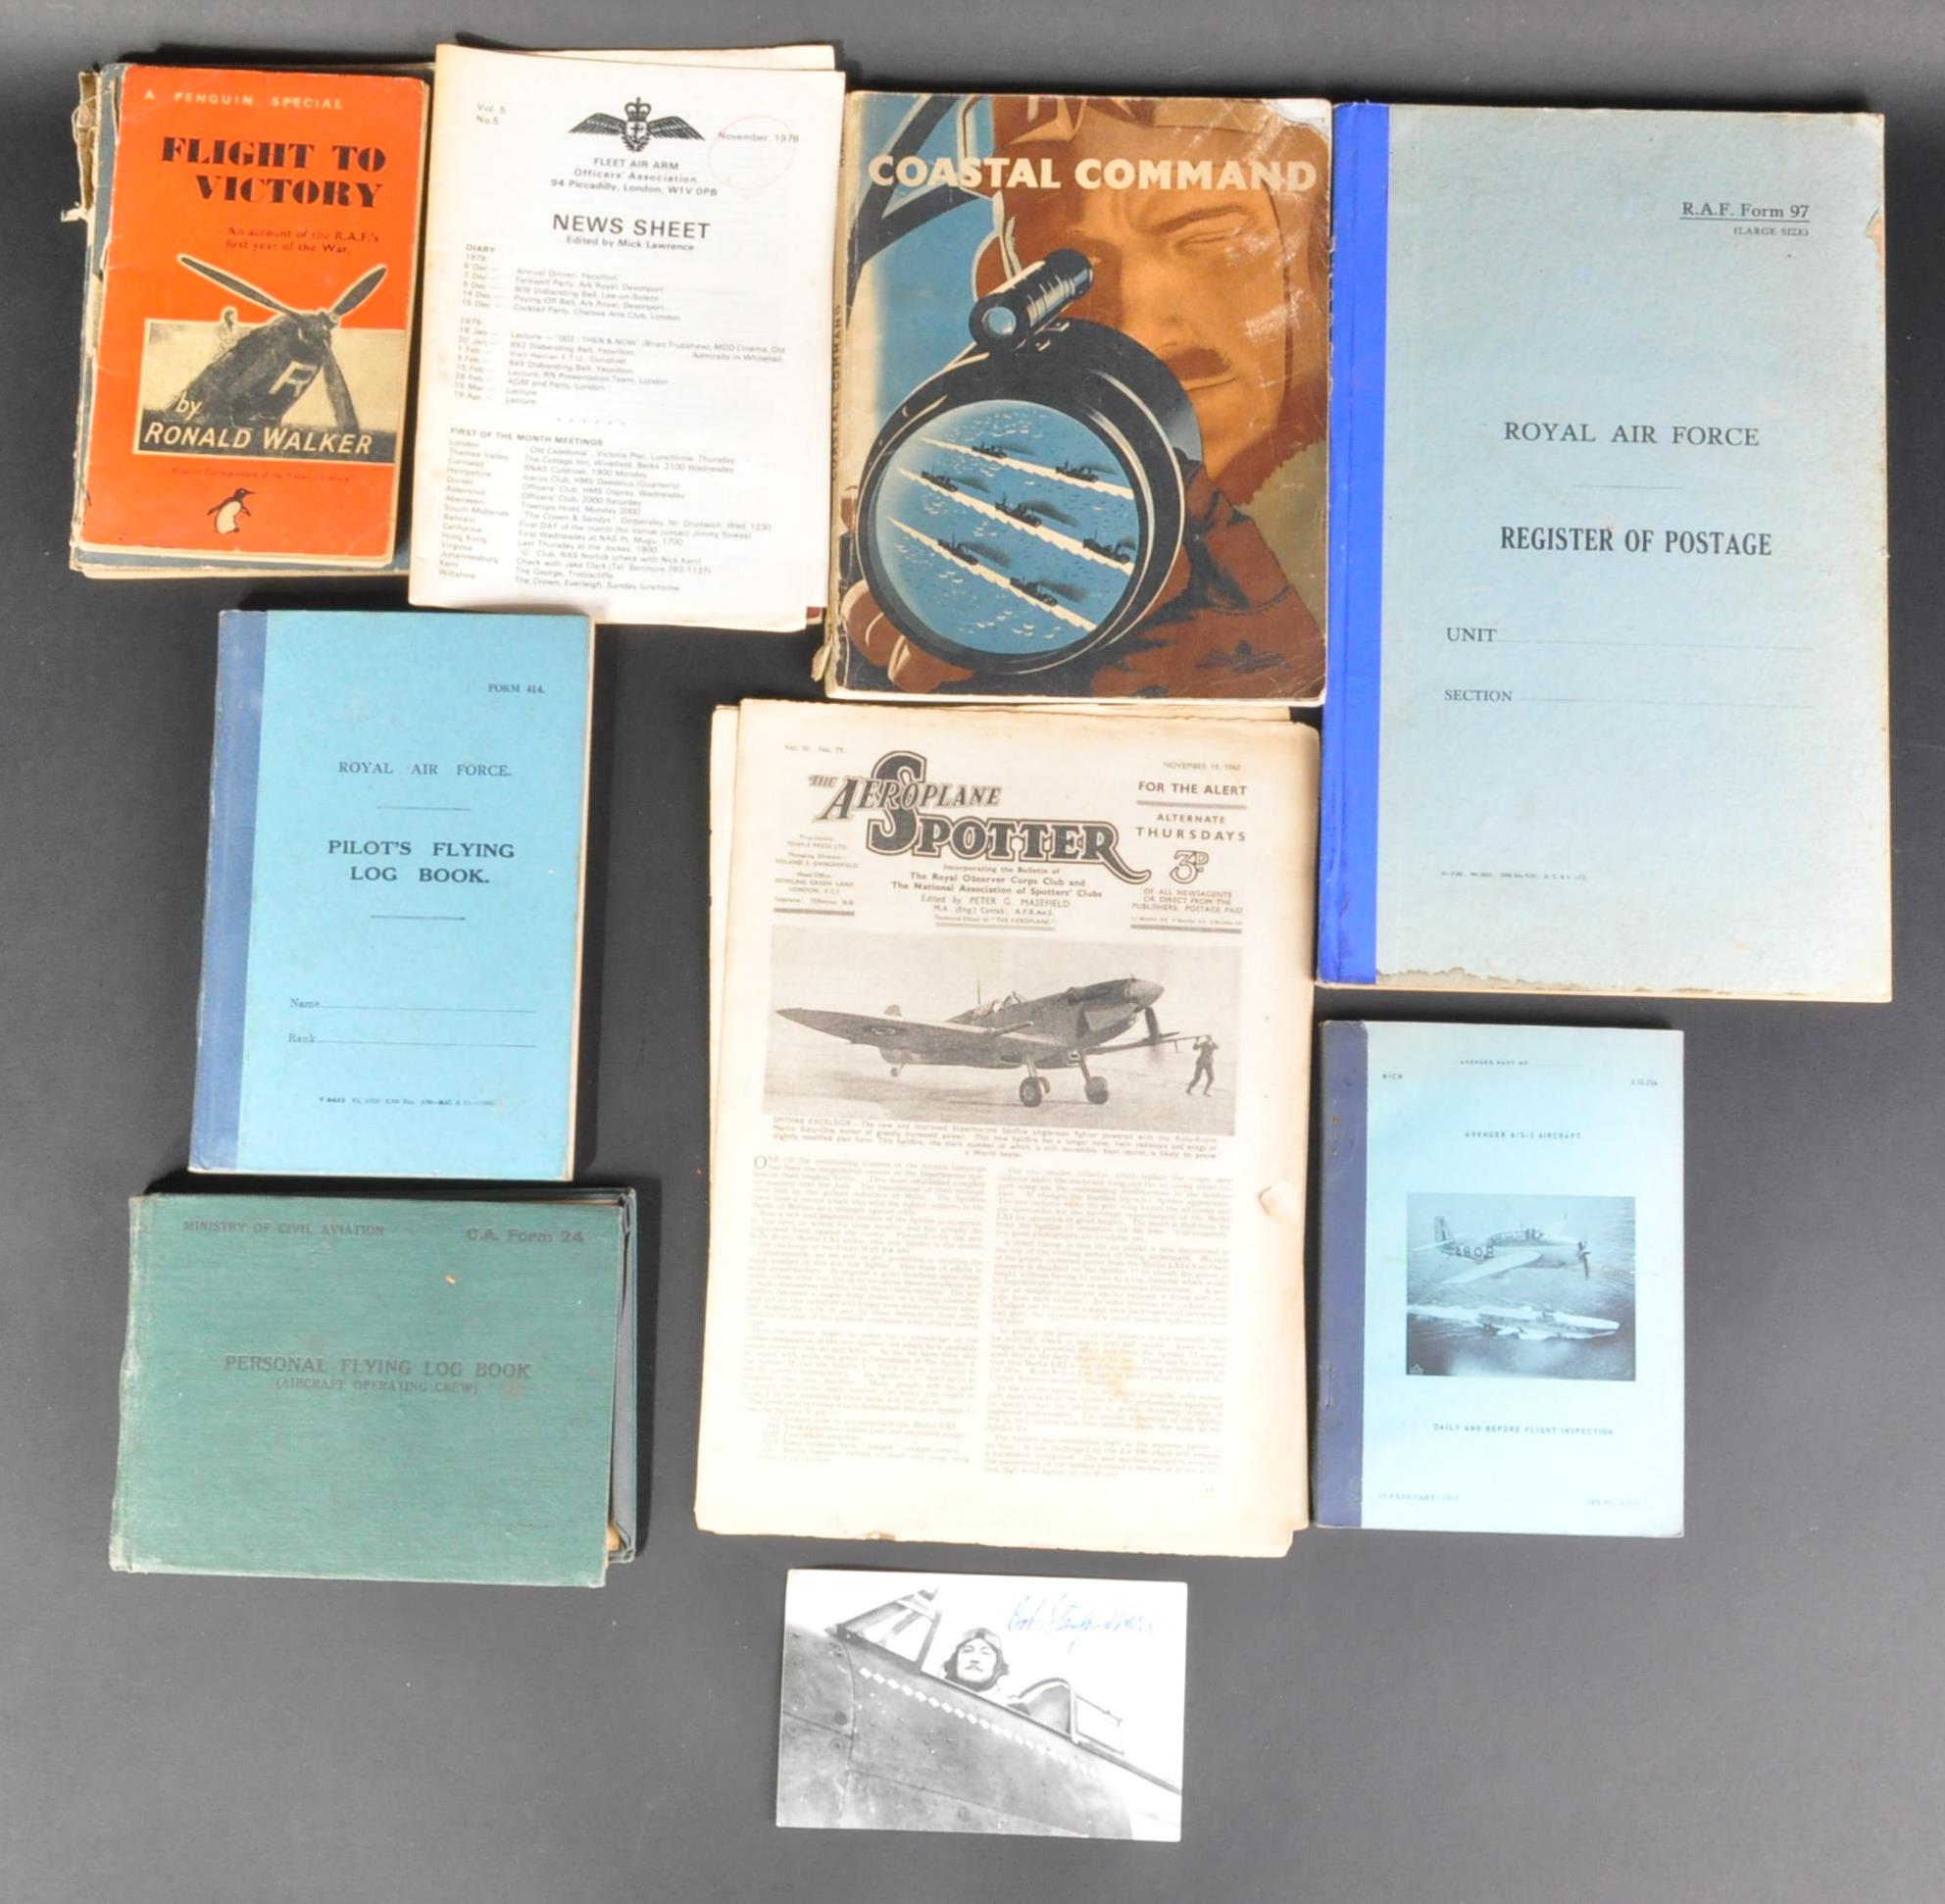 WWII SECOND WORLD WAR RELATED EPHEMERA - ROYAL AIR FORCE ETC